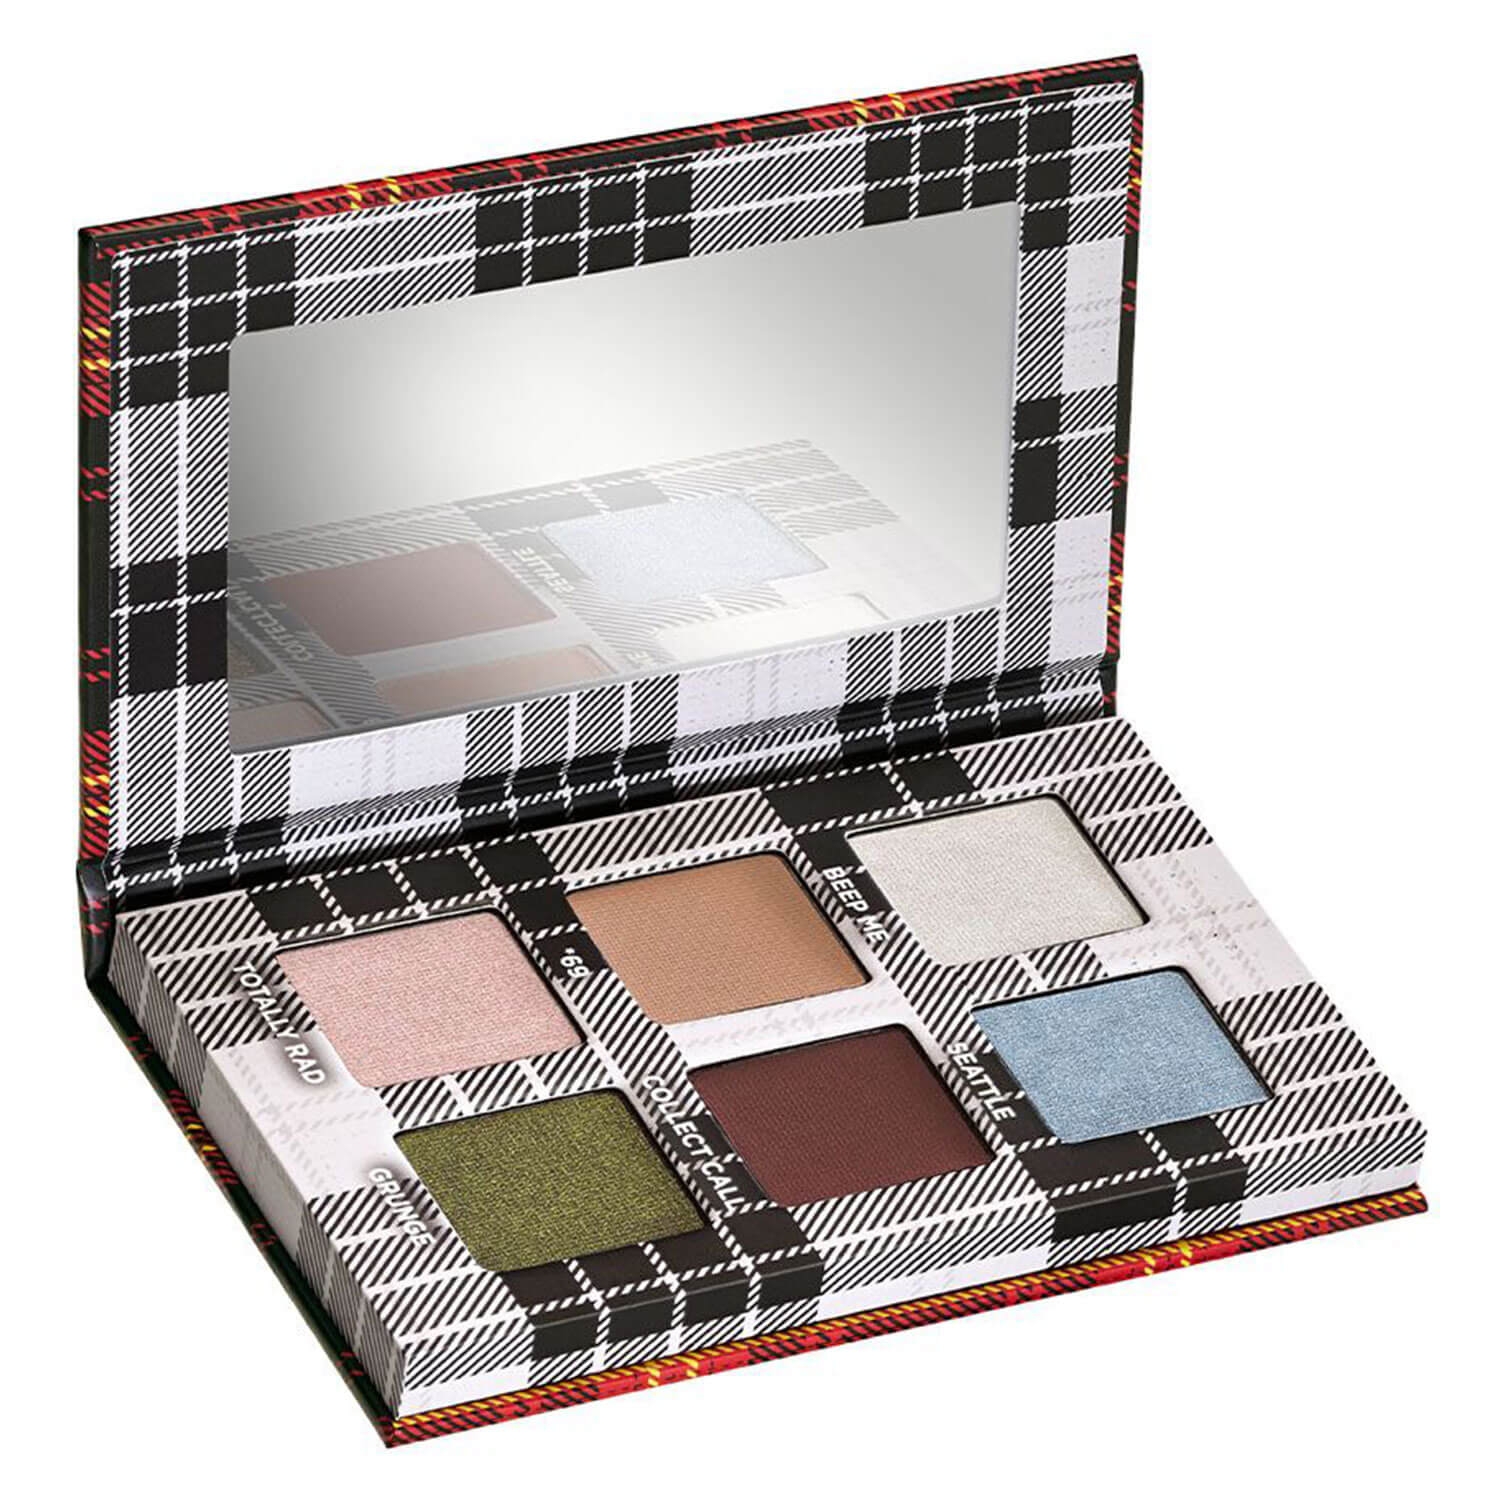 Product image from Decades - 90s 1993 Mini Eyeshadow Palette